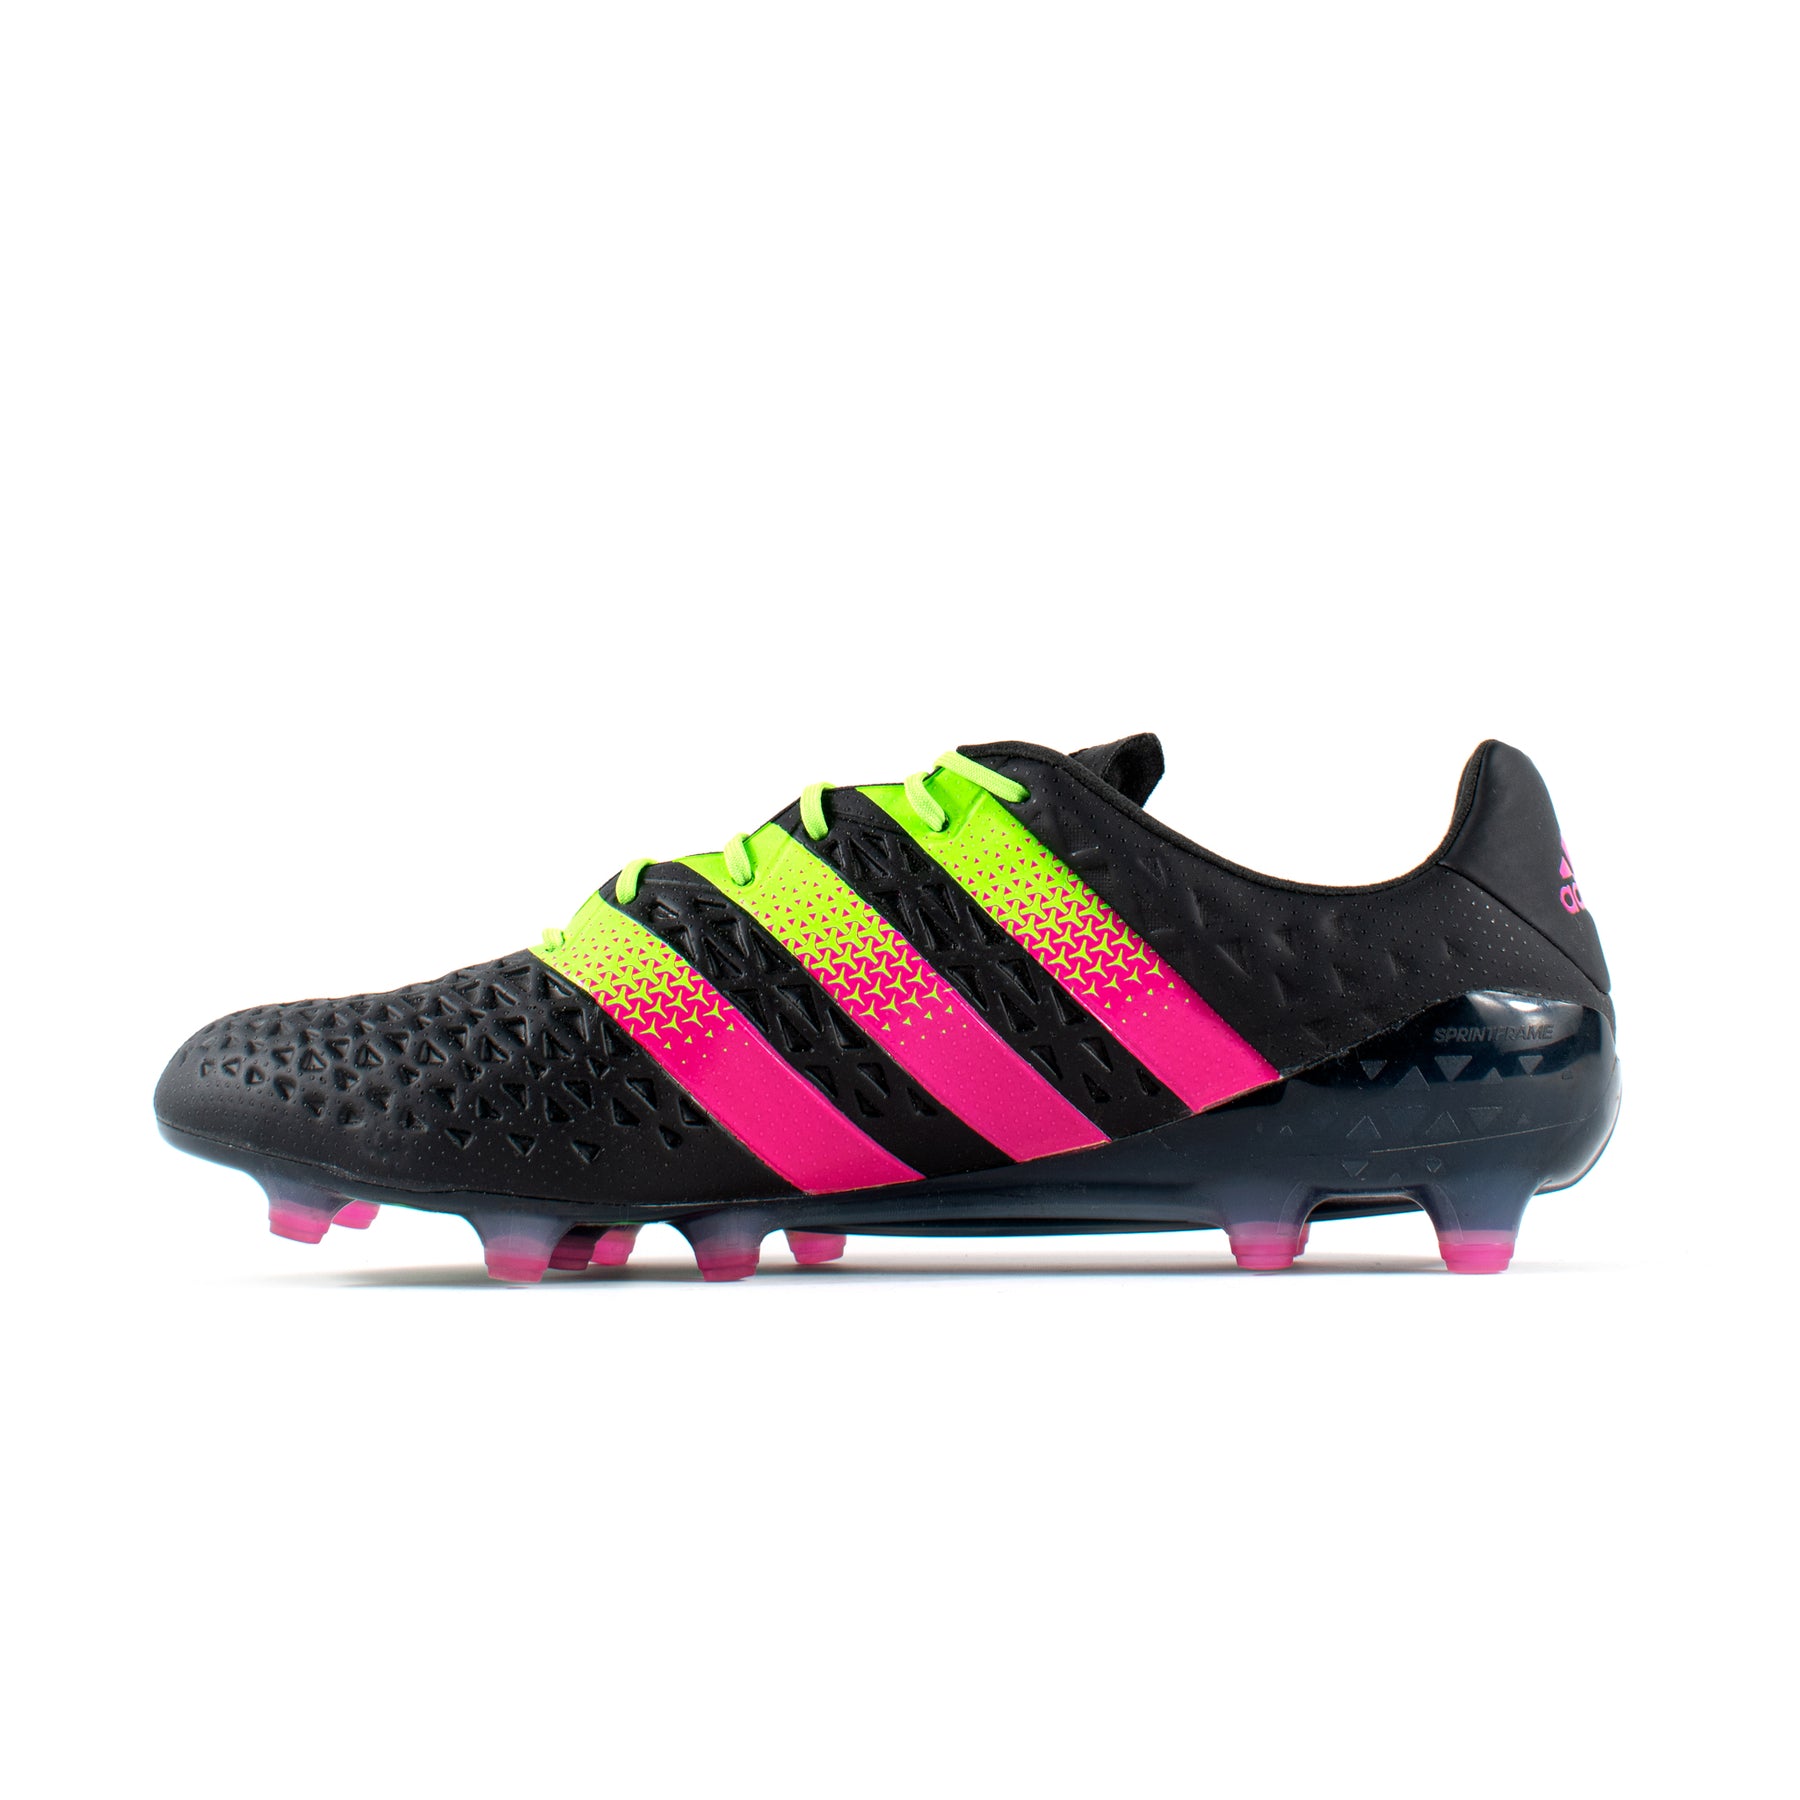 Adidas Ace Black Pink – Soccer Cleats